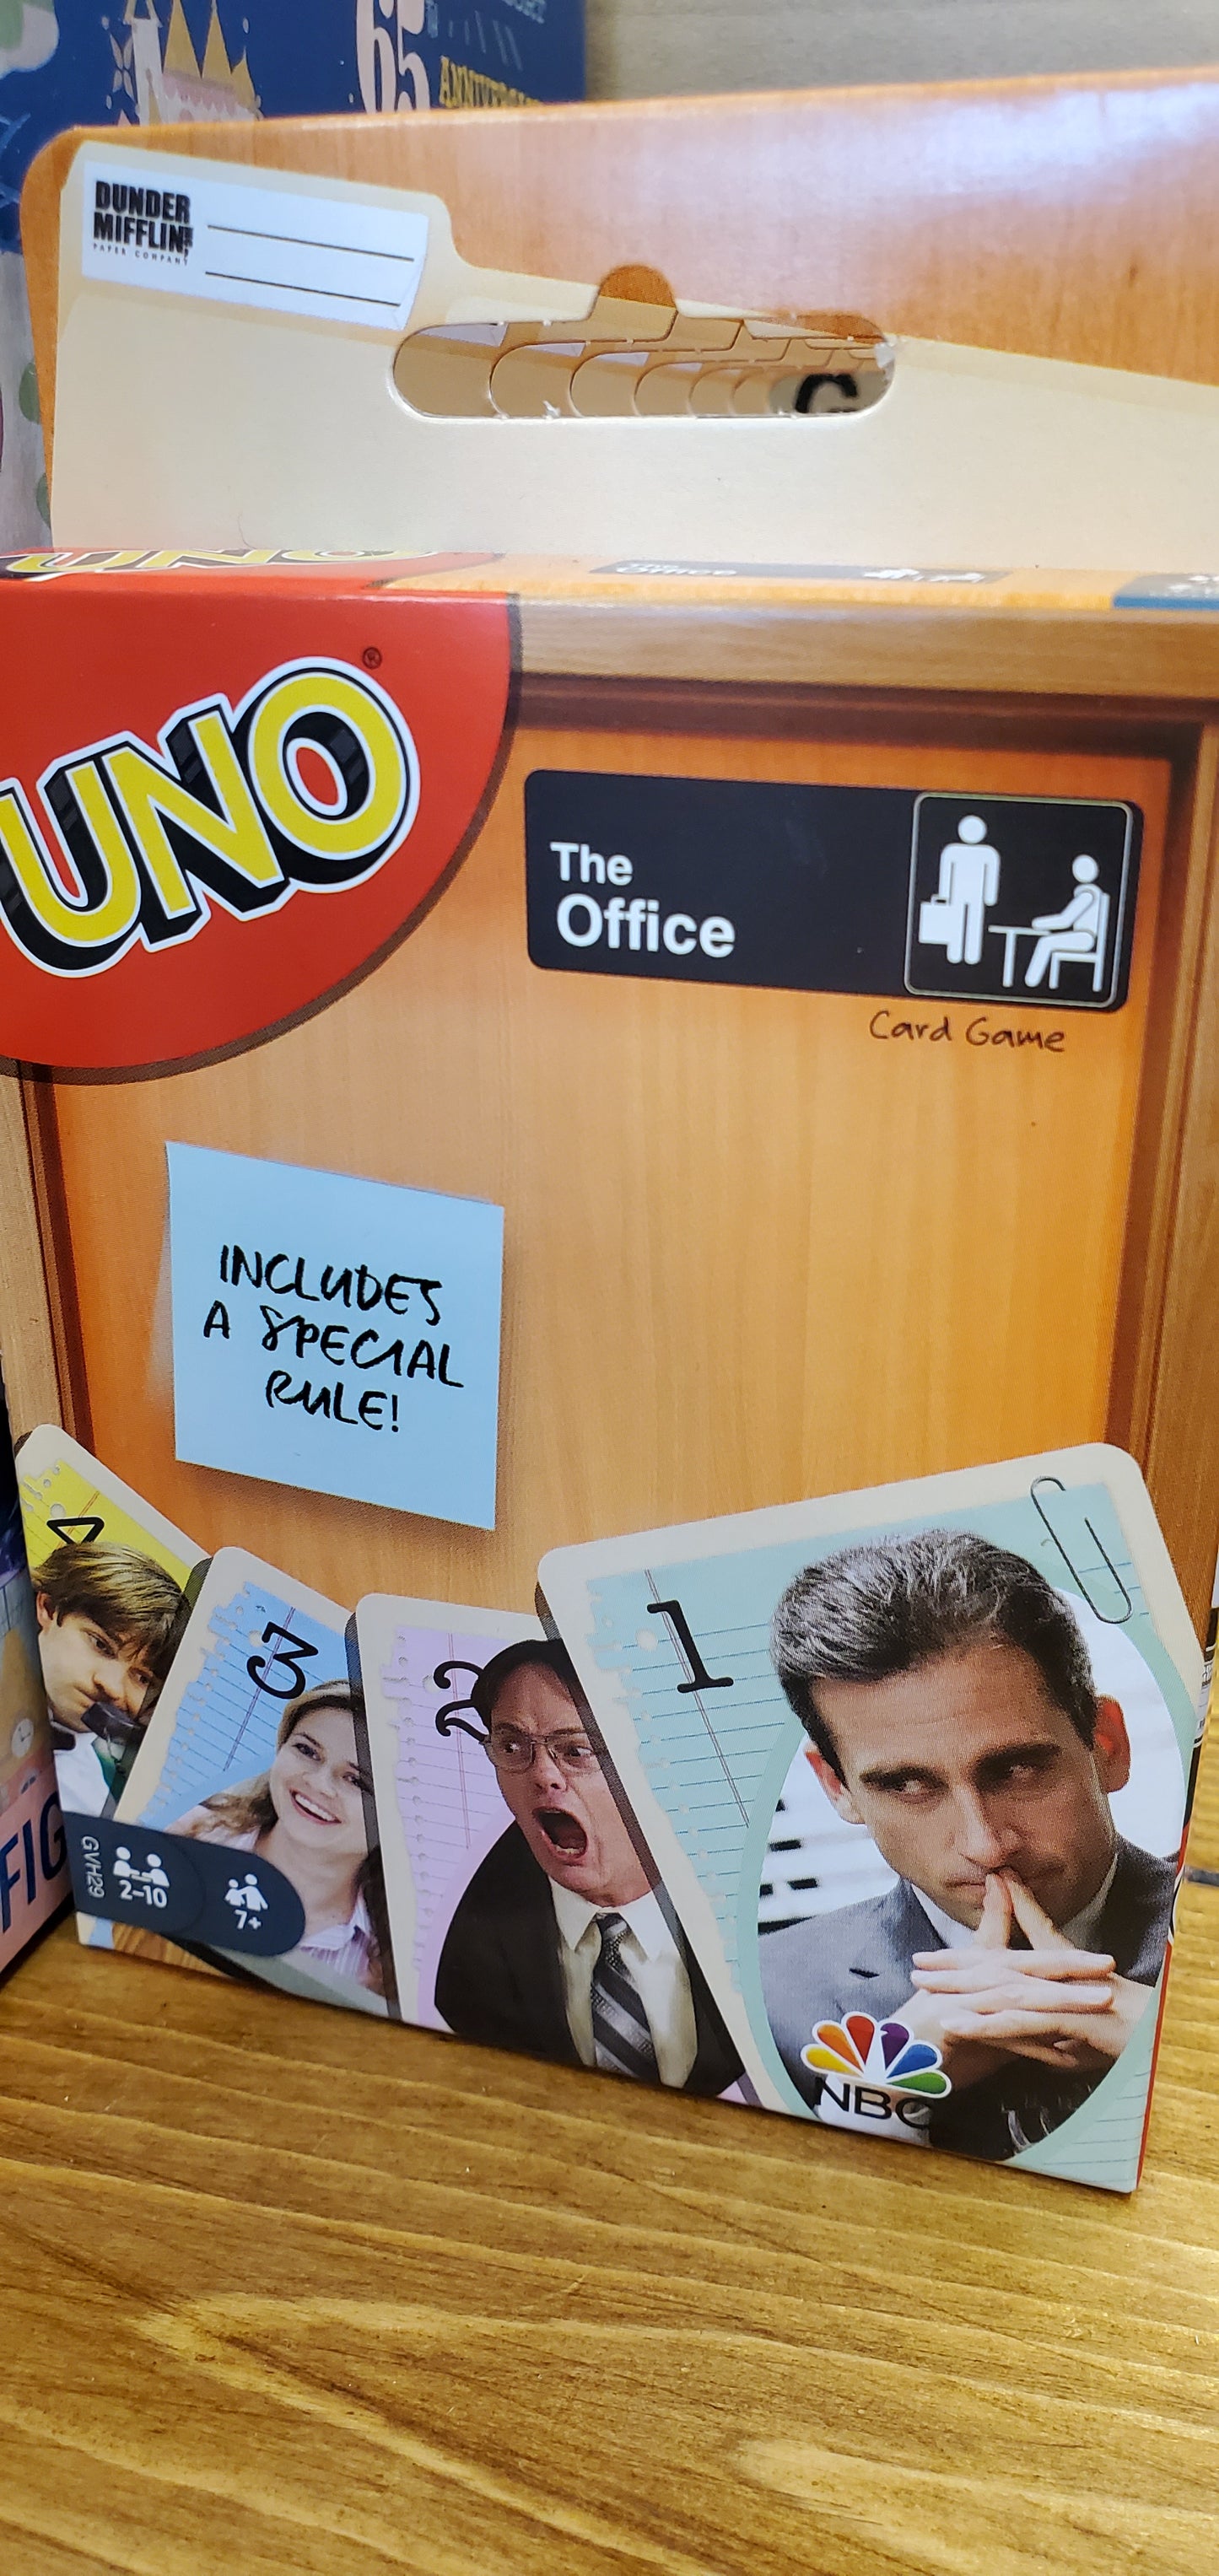 TV The Office Uno Card game